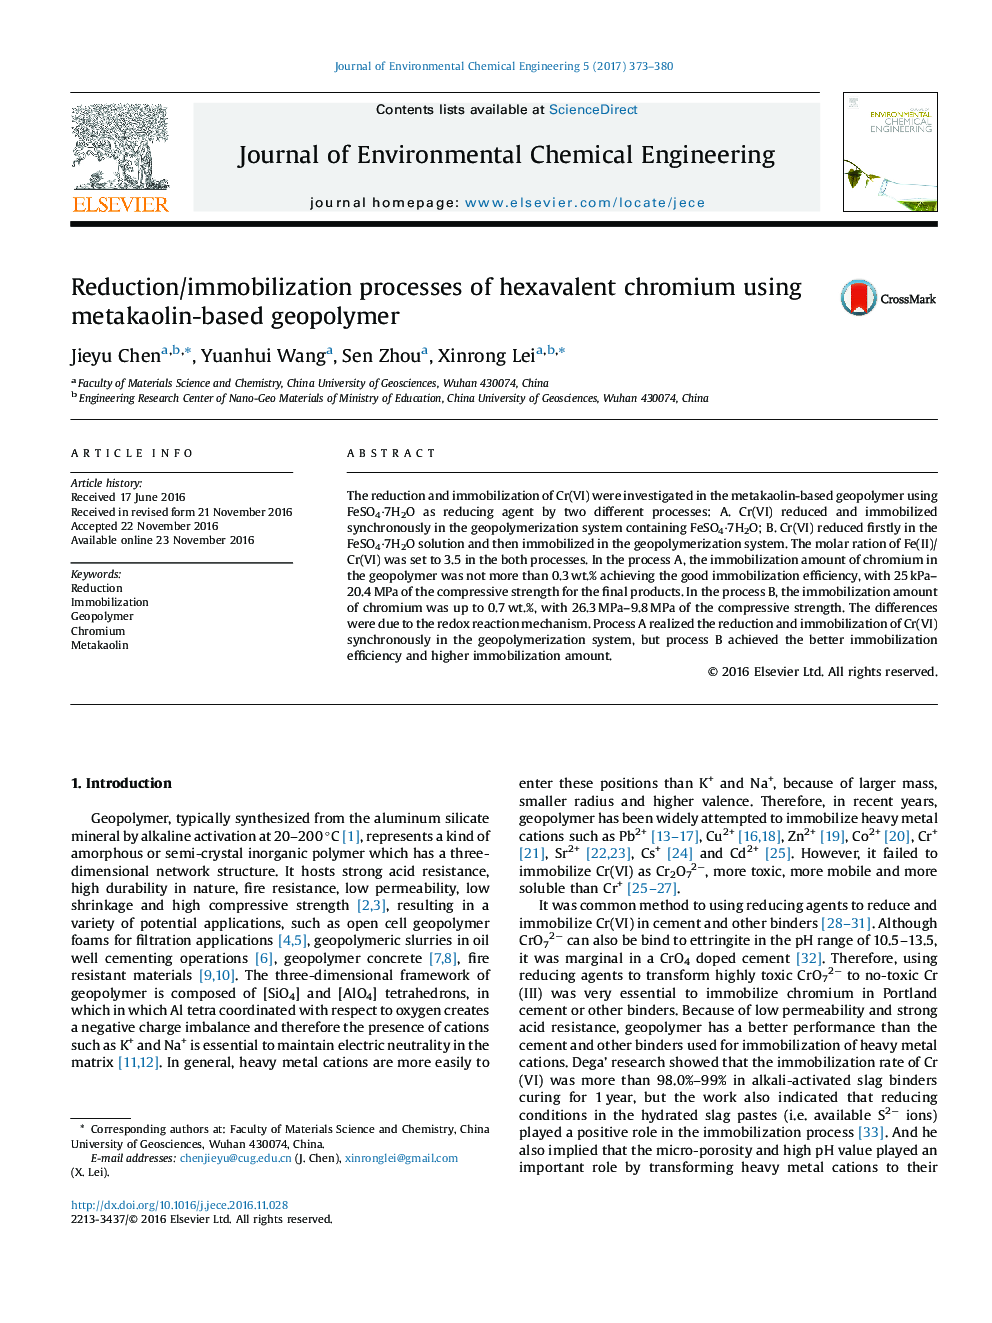 Reduction/immobilization processes of hexavalent chromium using metakaolin-based geopolymer